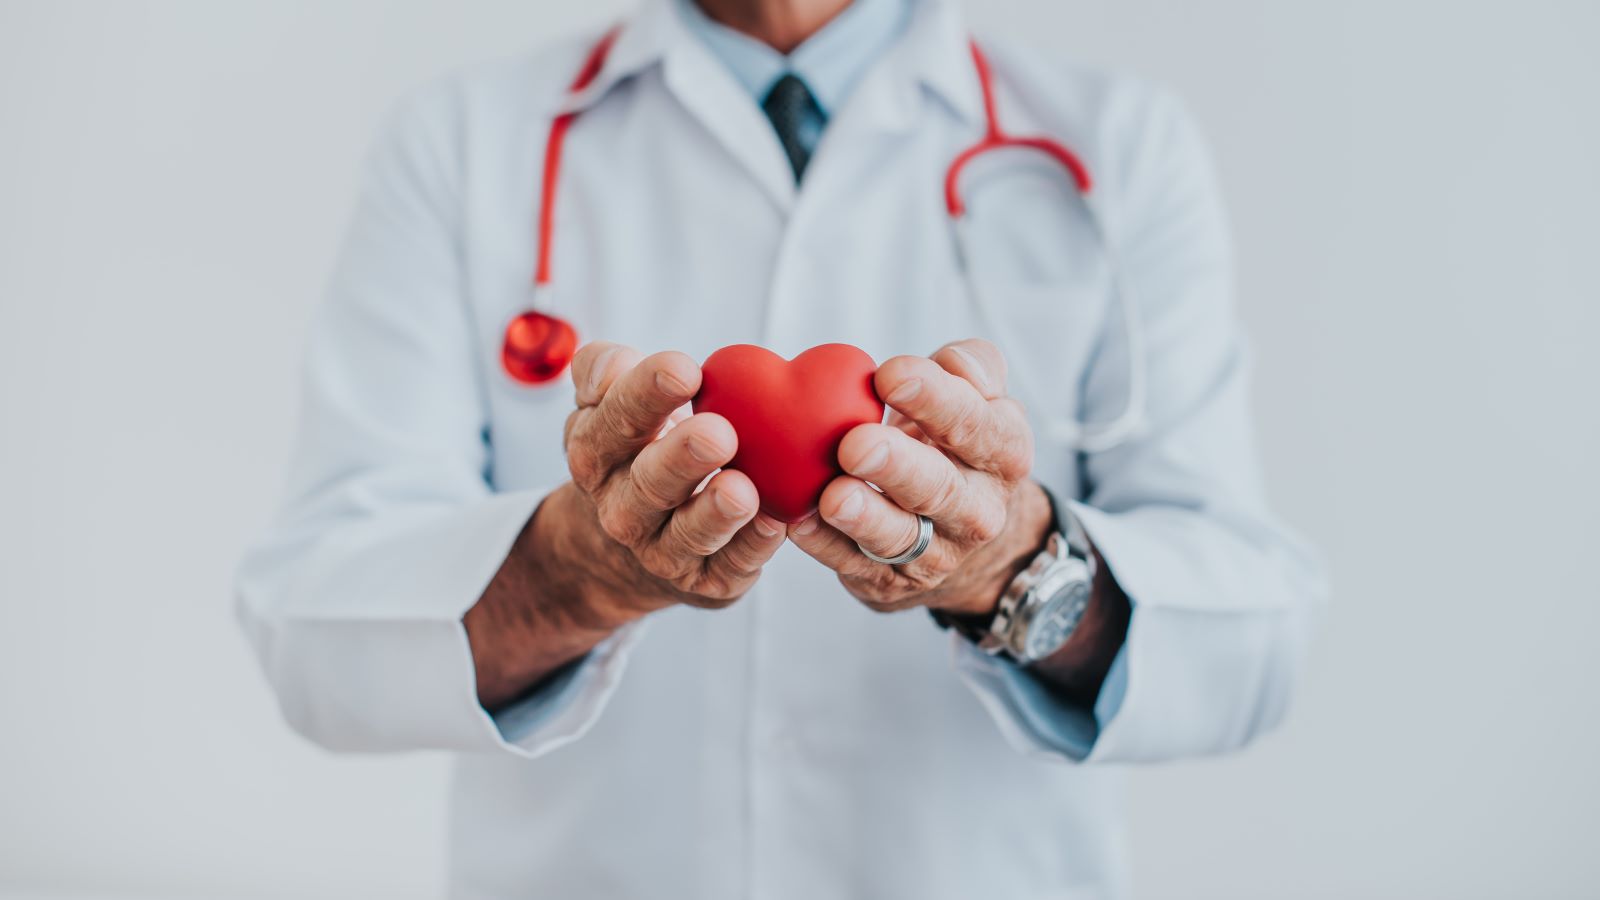 Like many chronic diseases, living with AFib (atrial fibrillation) can take a mental and emotional toll. An expert shares tips.